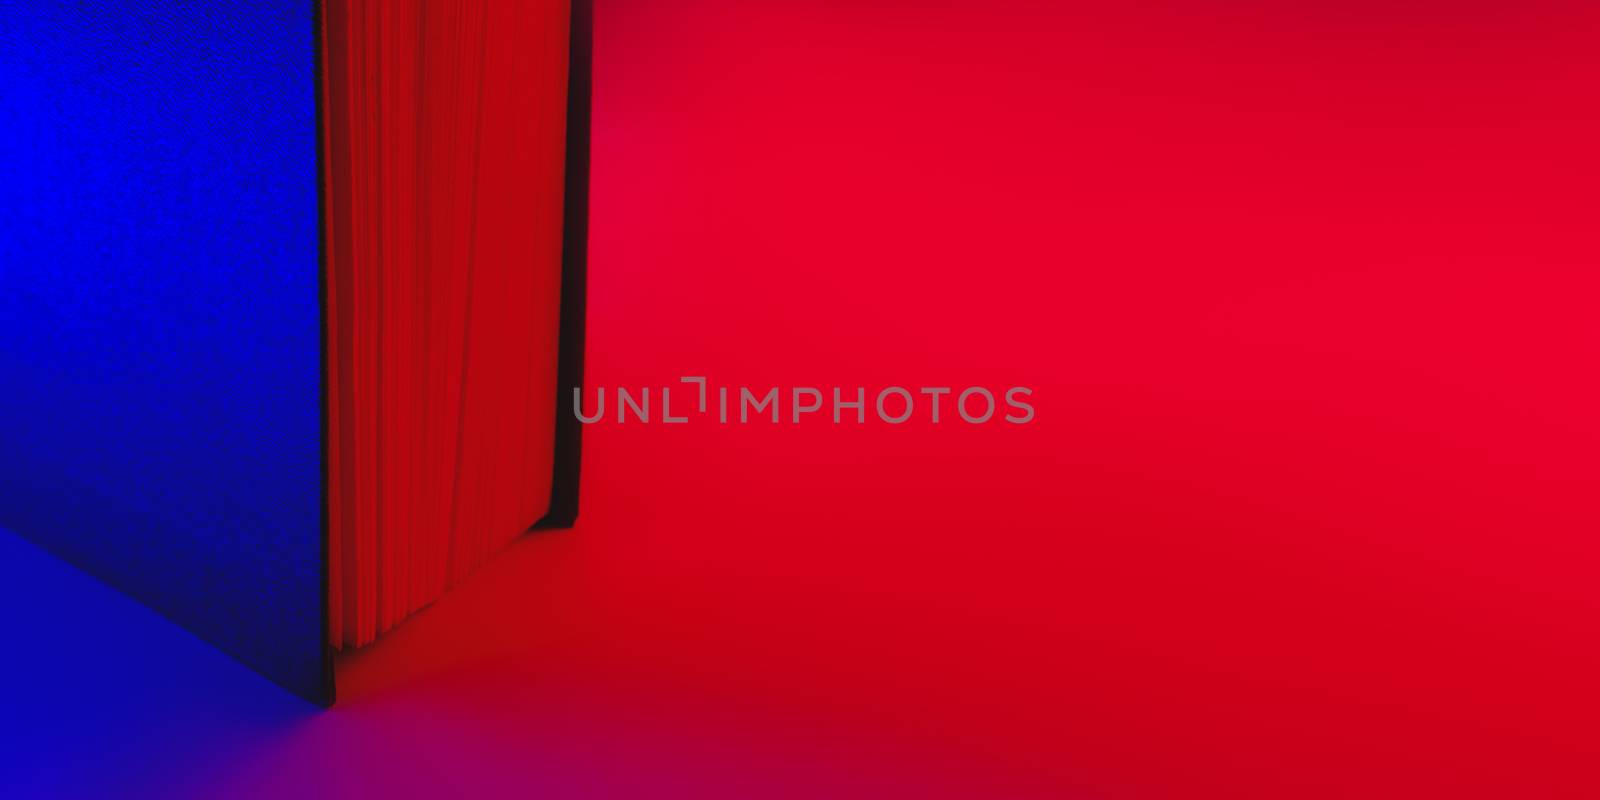 Open book in vibrant blue and red colors. Vivid neon gradients, abstract background image of a book